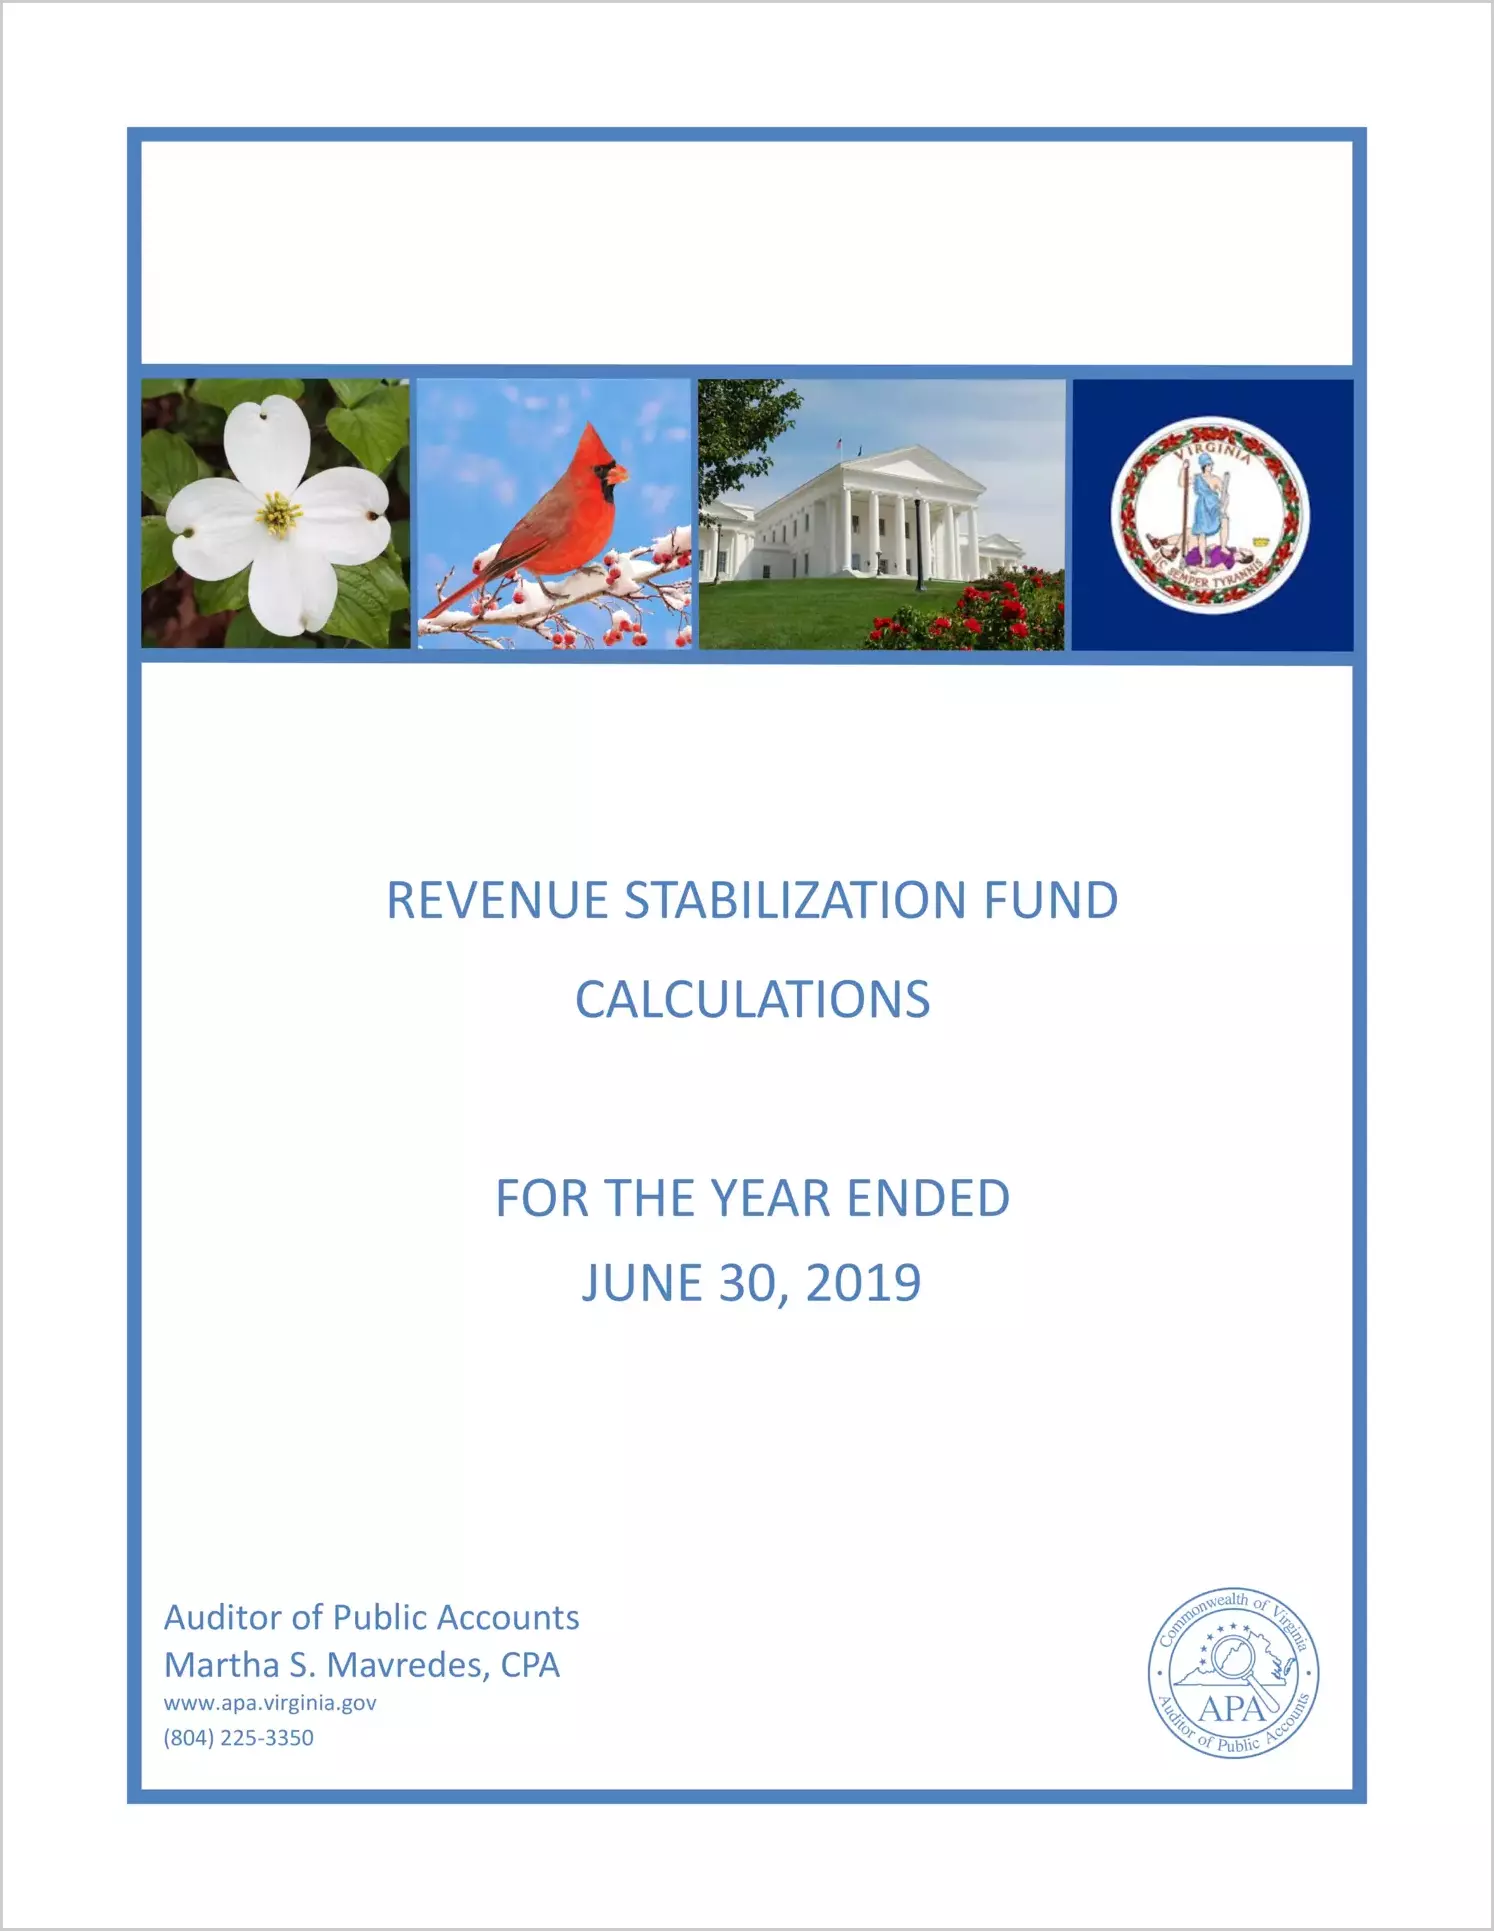 Revenue Stabilization Fund Calculations for the year ended June 30, 2019